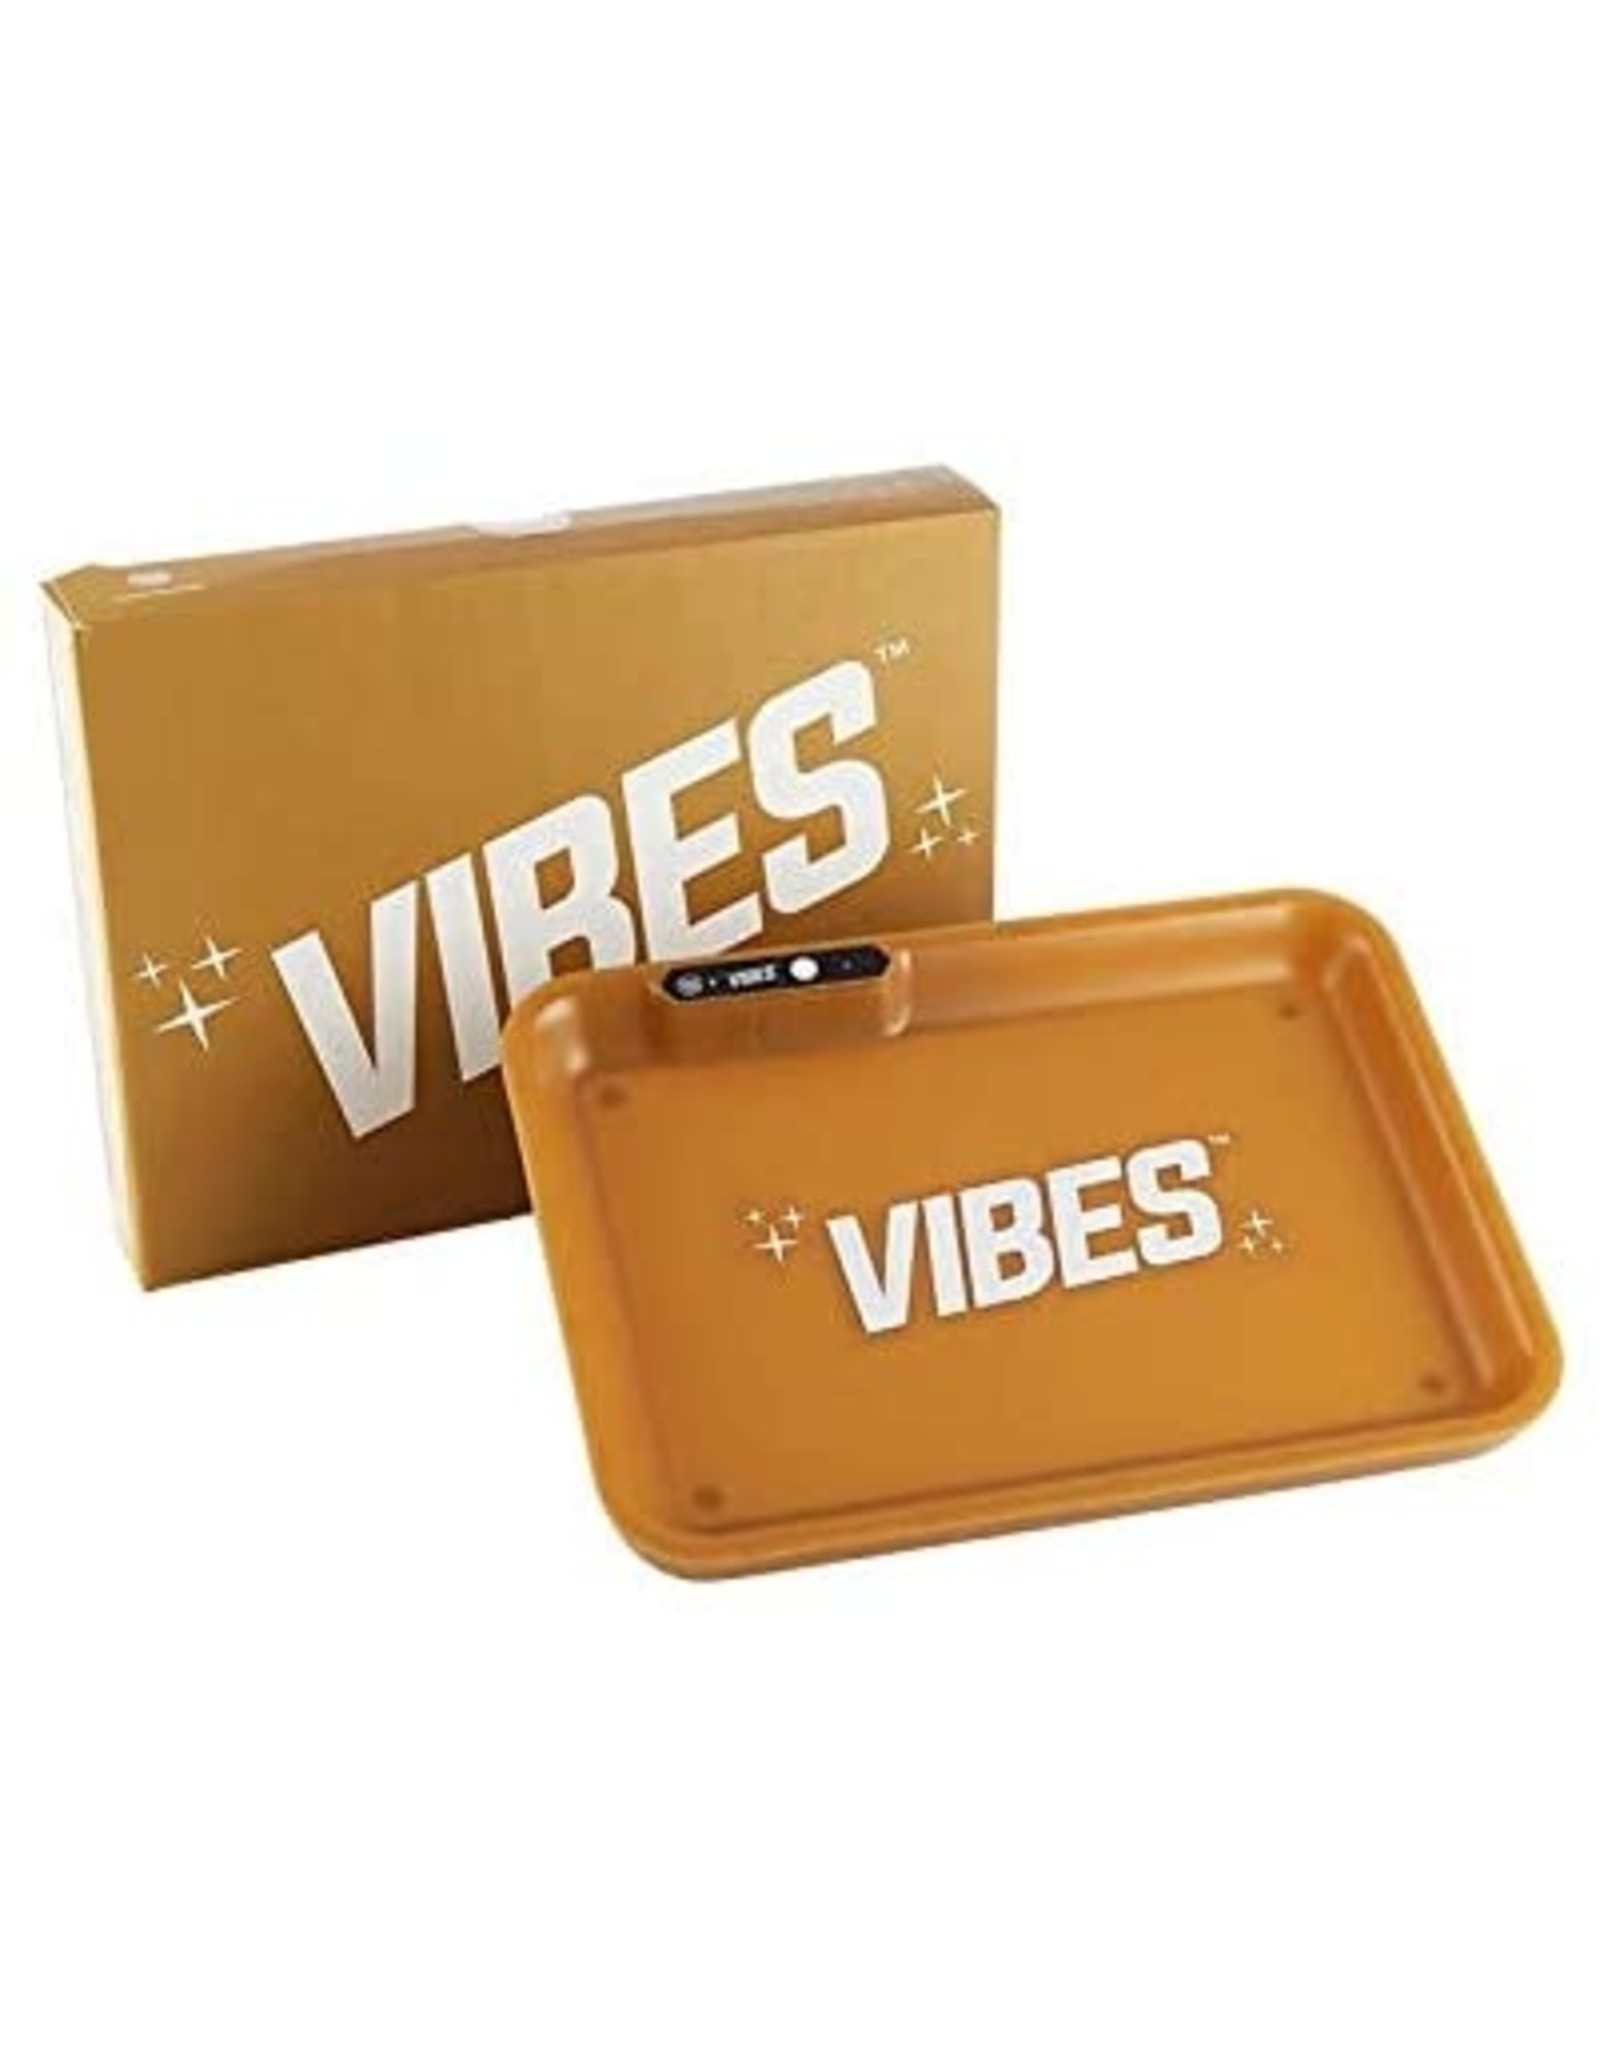 Vibes Glow Tray x Vibes